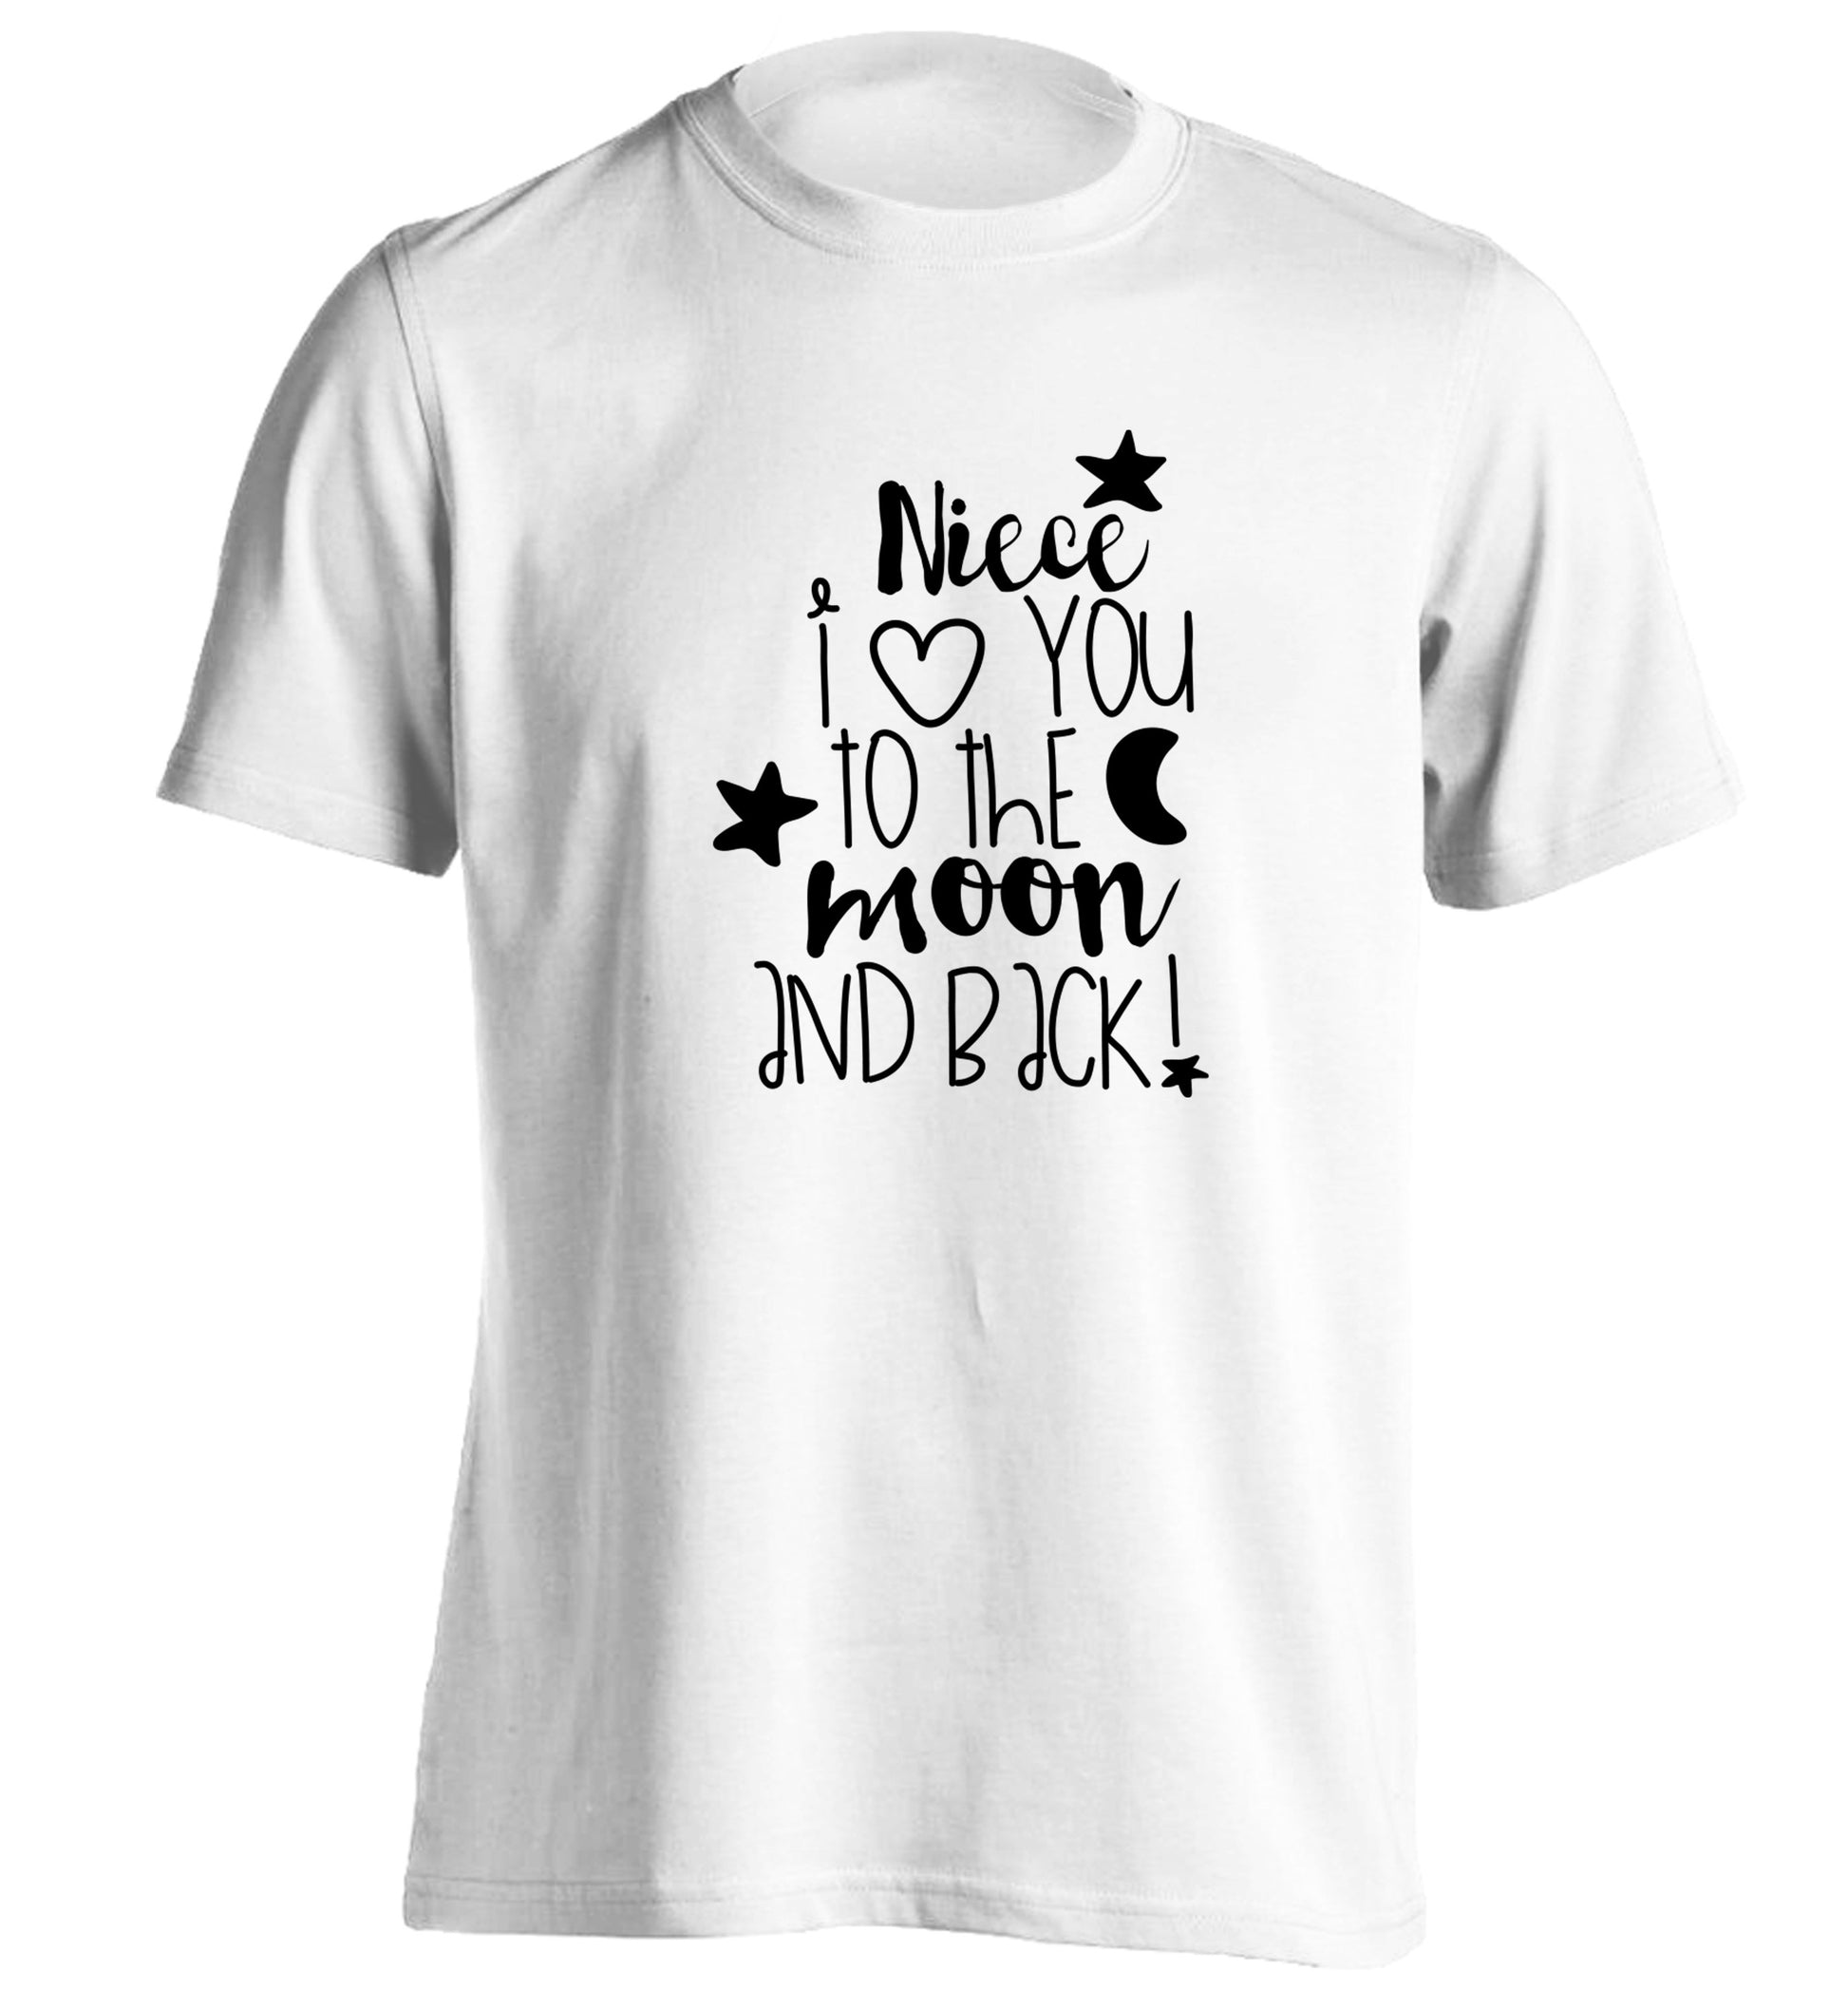 Niece I love you to the moon and back adults unisex white Tshirt 2XL